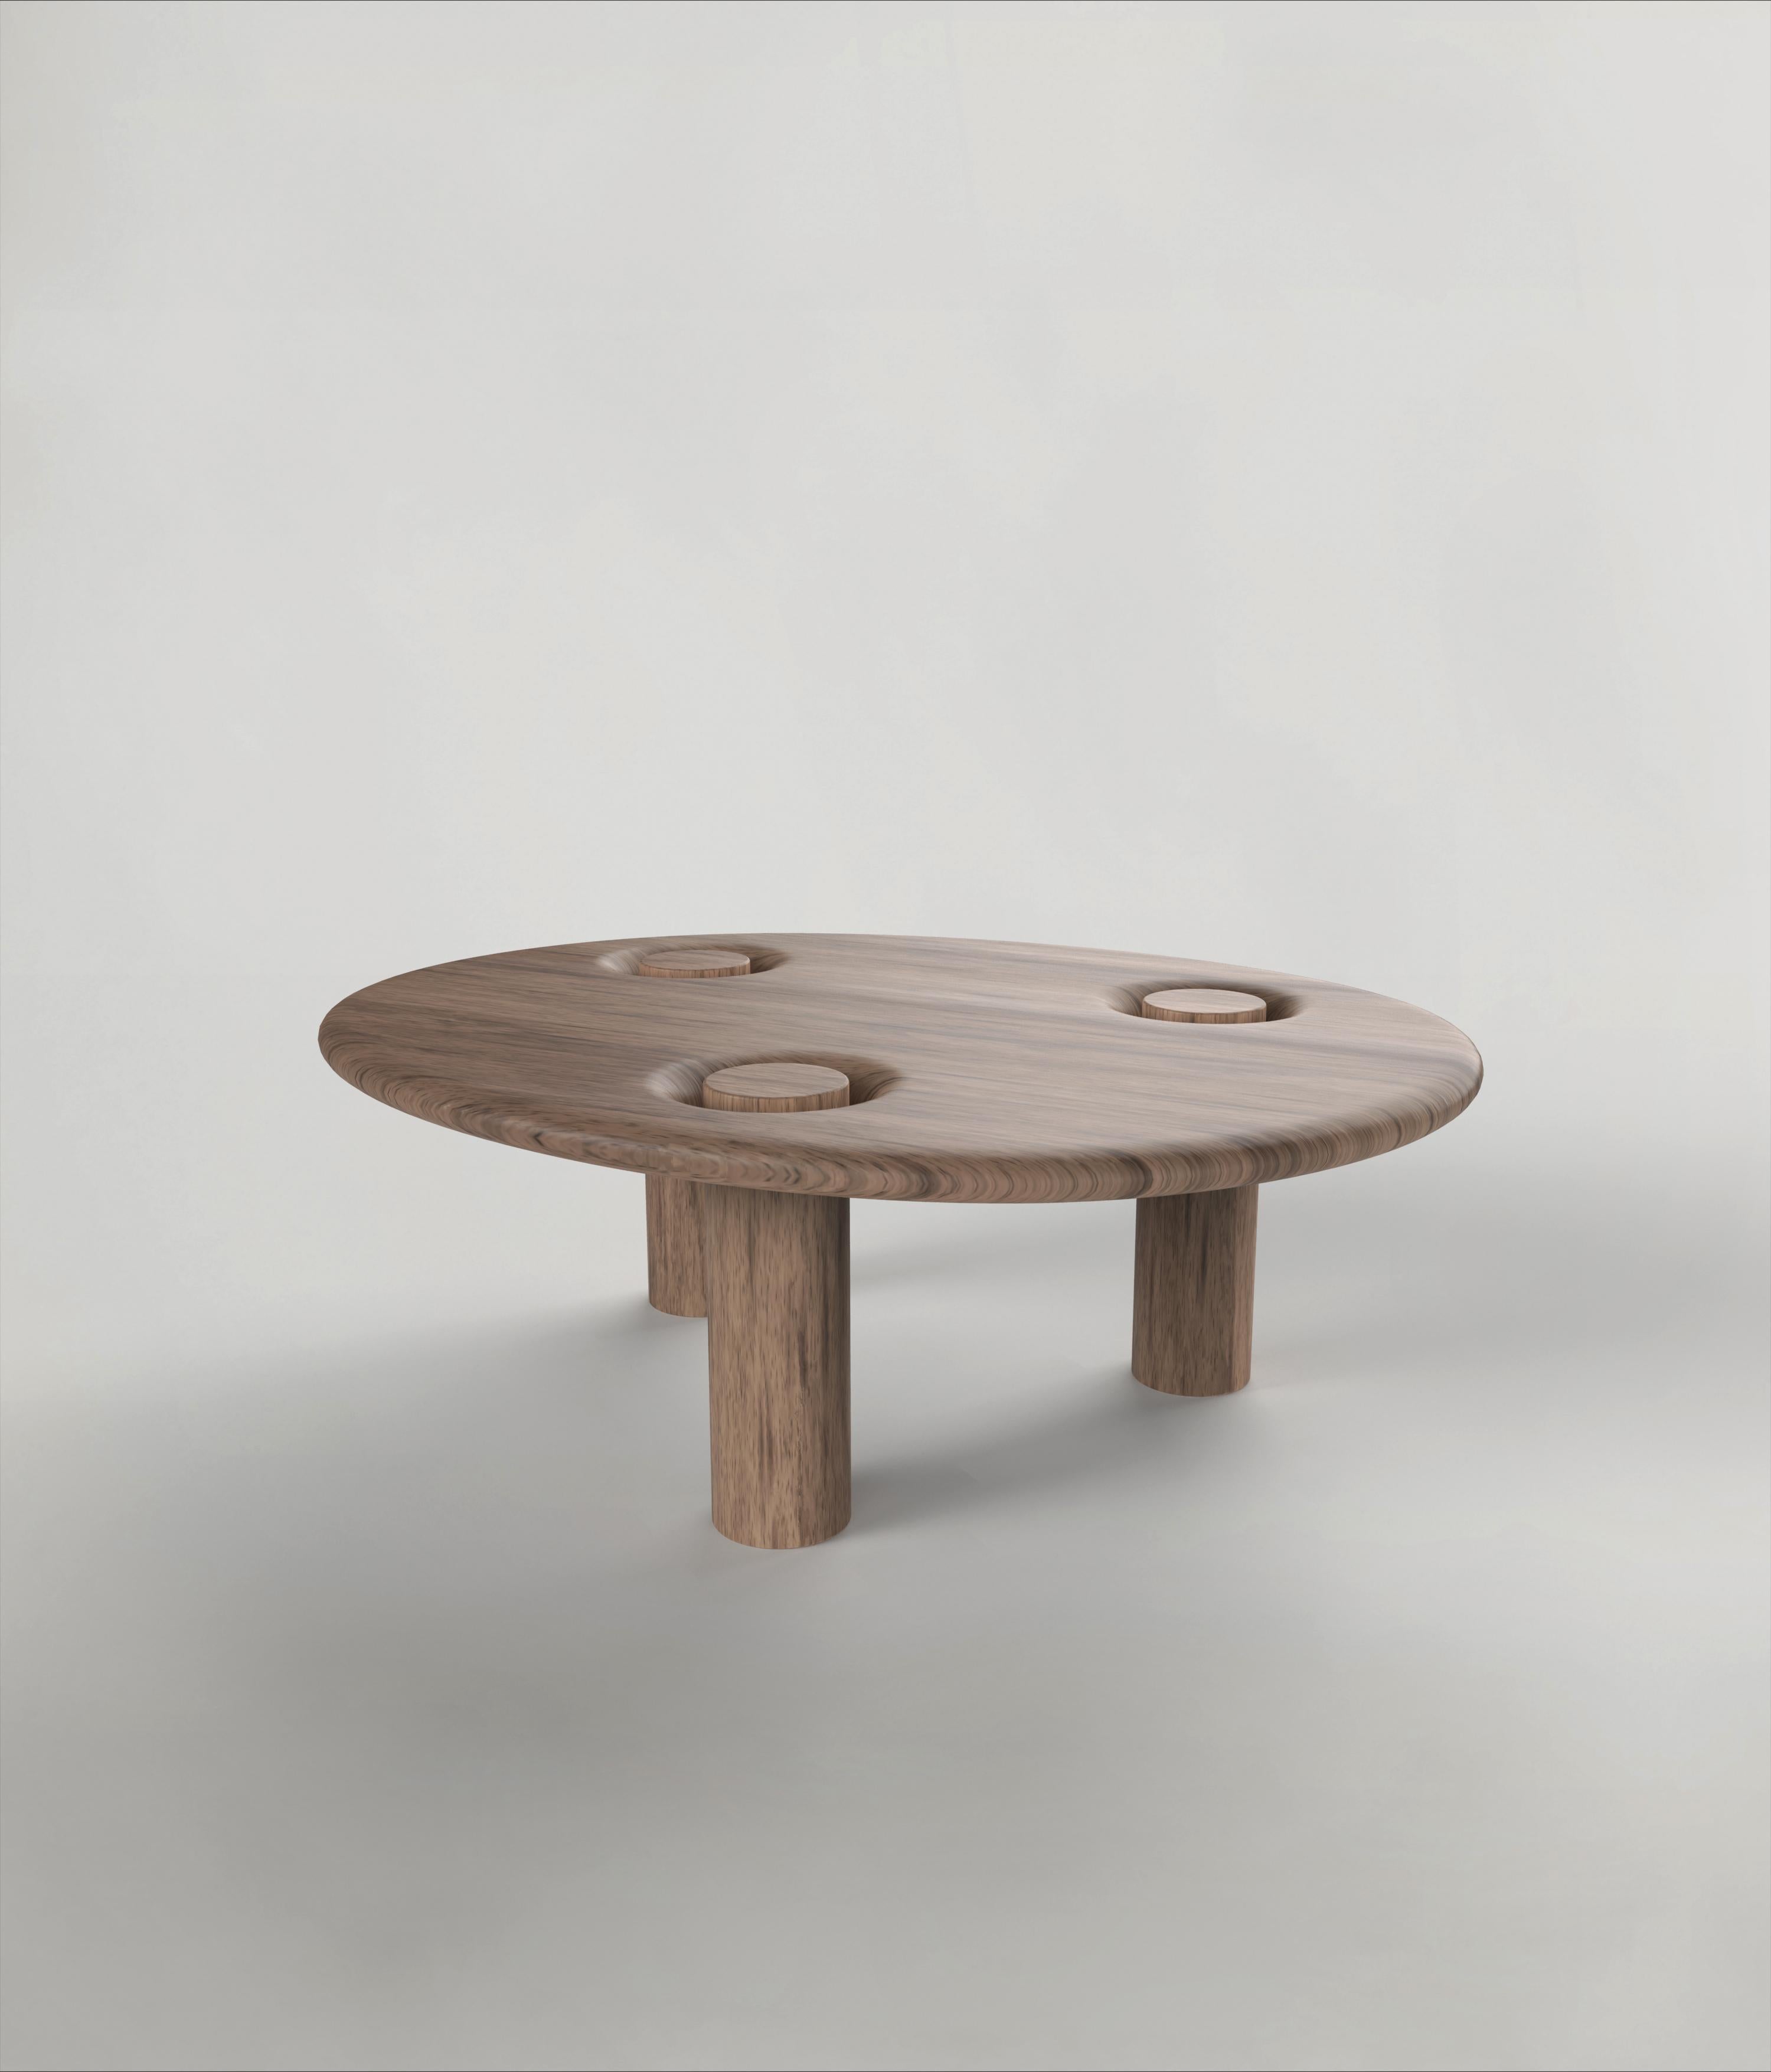 Italian Contemporary LimitedEdition Signed Wood Low Table, Asido V1 by Edizione Limitata For Sale